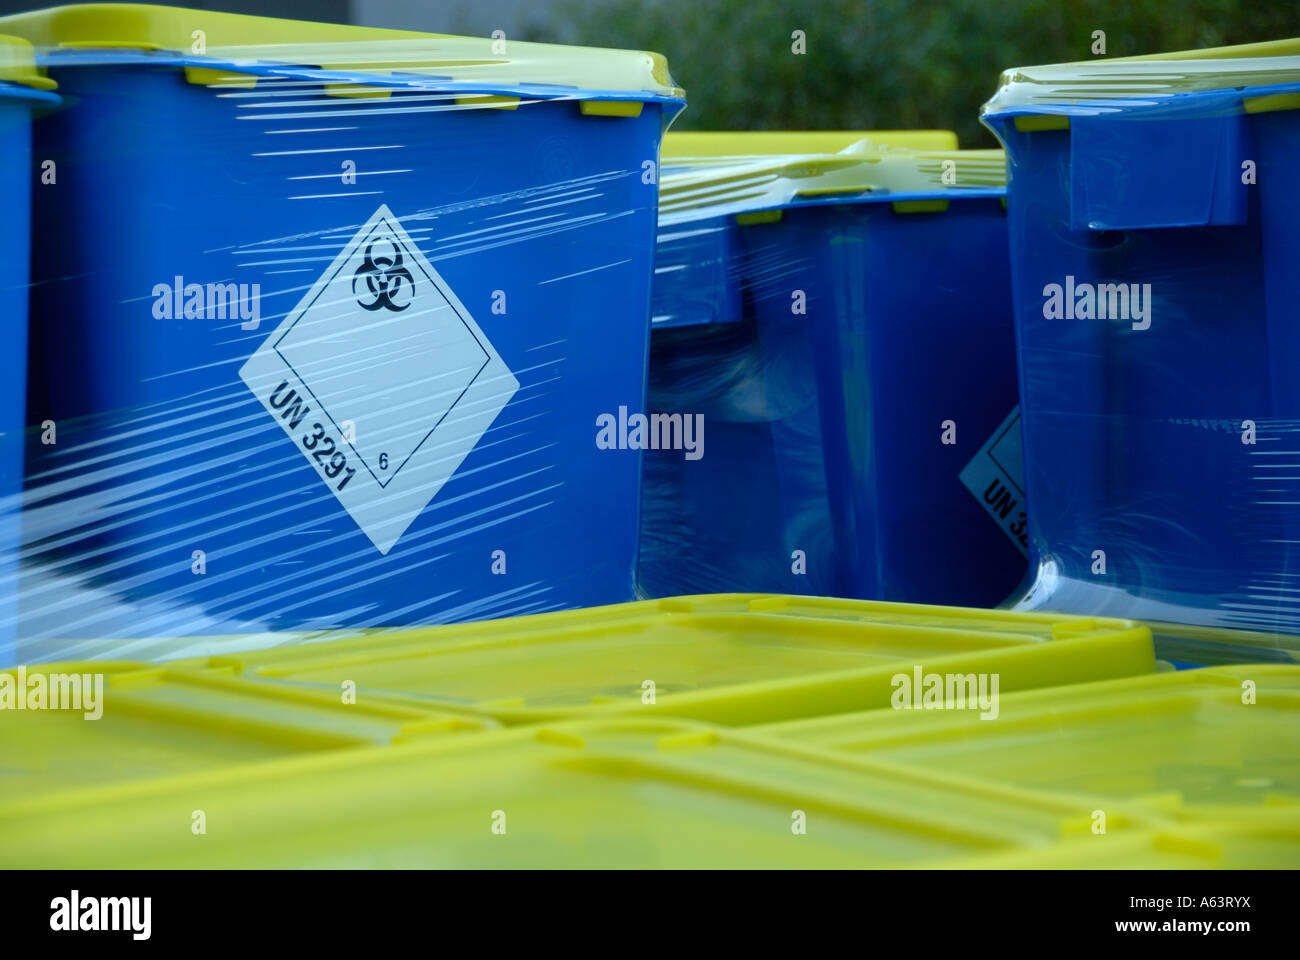 biohazard sign on blue containers. Stock Photo